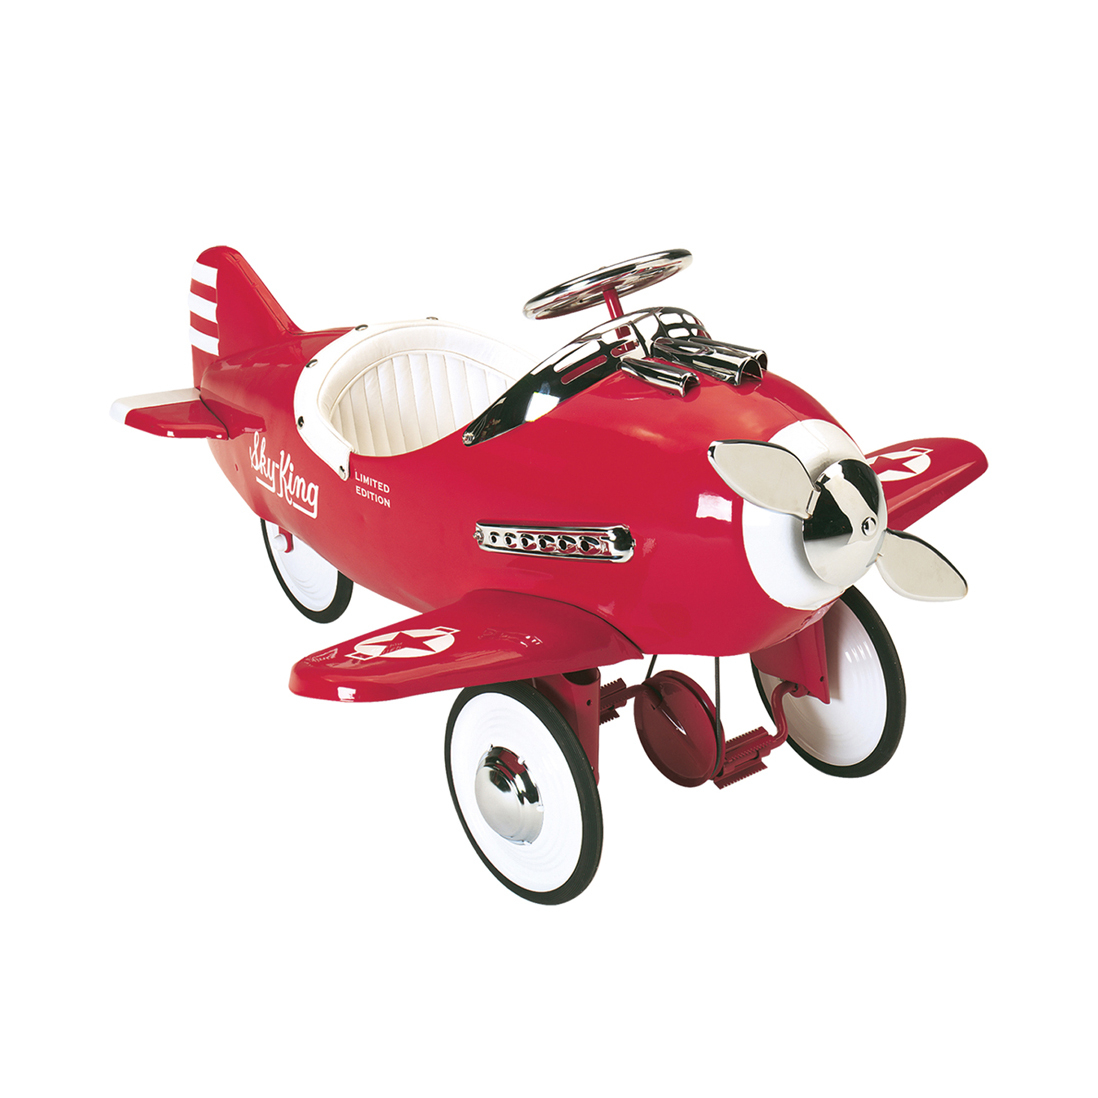 Airplane riding toy 6